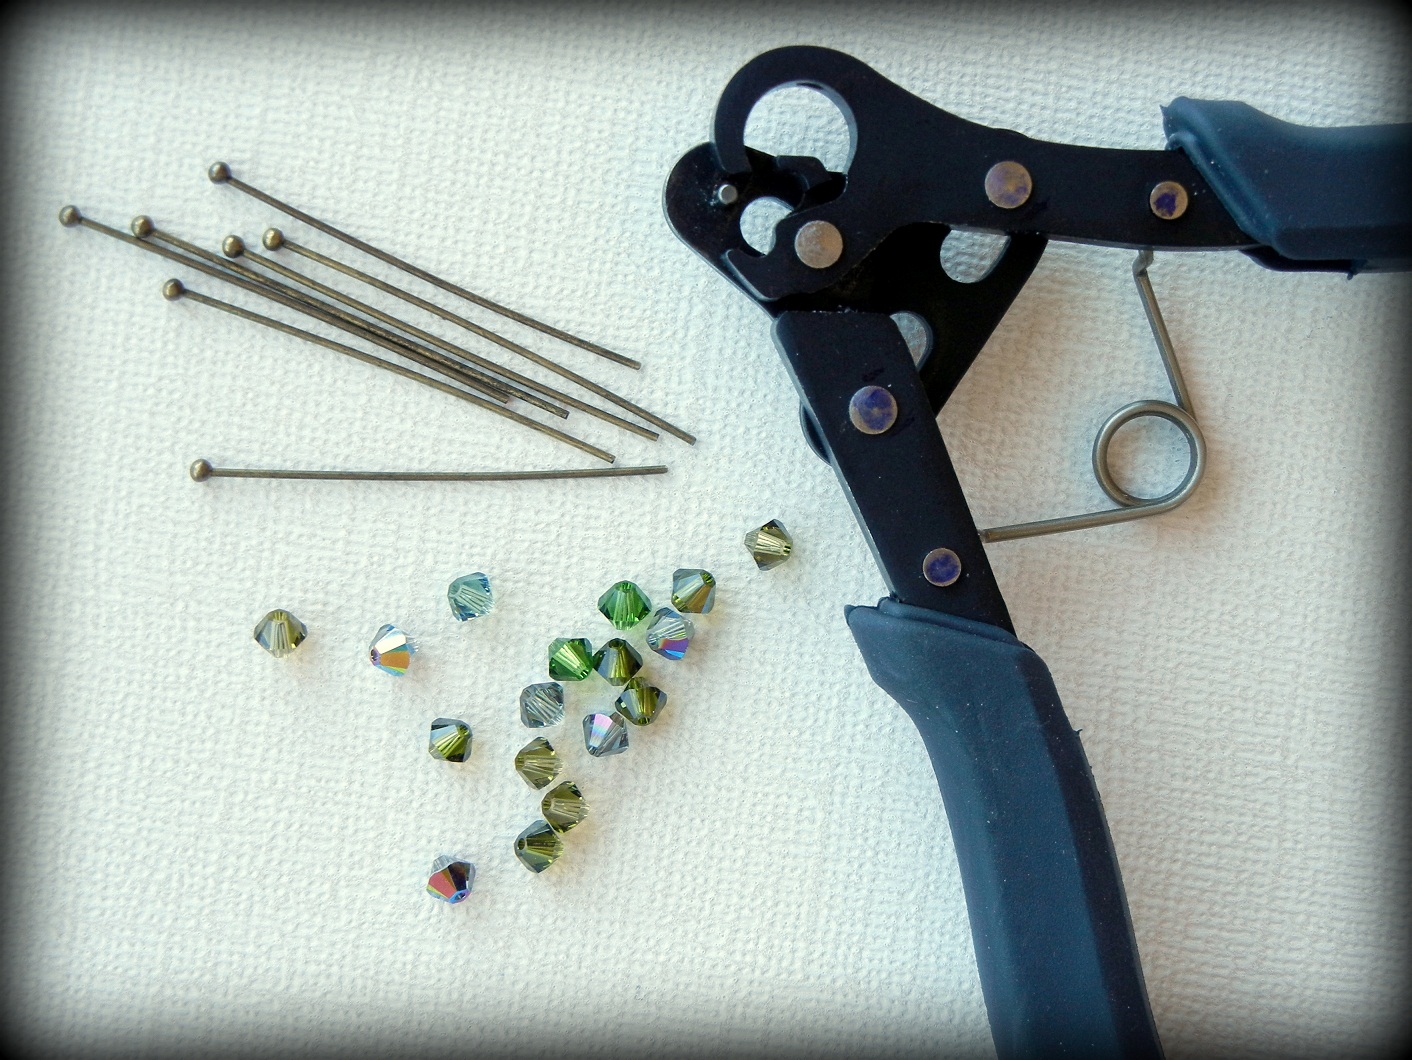 Use the One Step Looper to Create QUICK and Easy Jewelry Loops! 